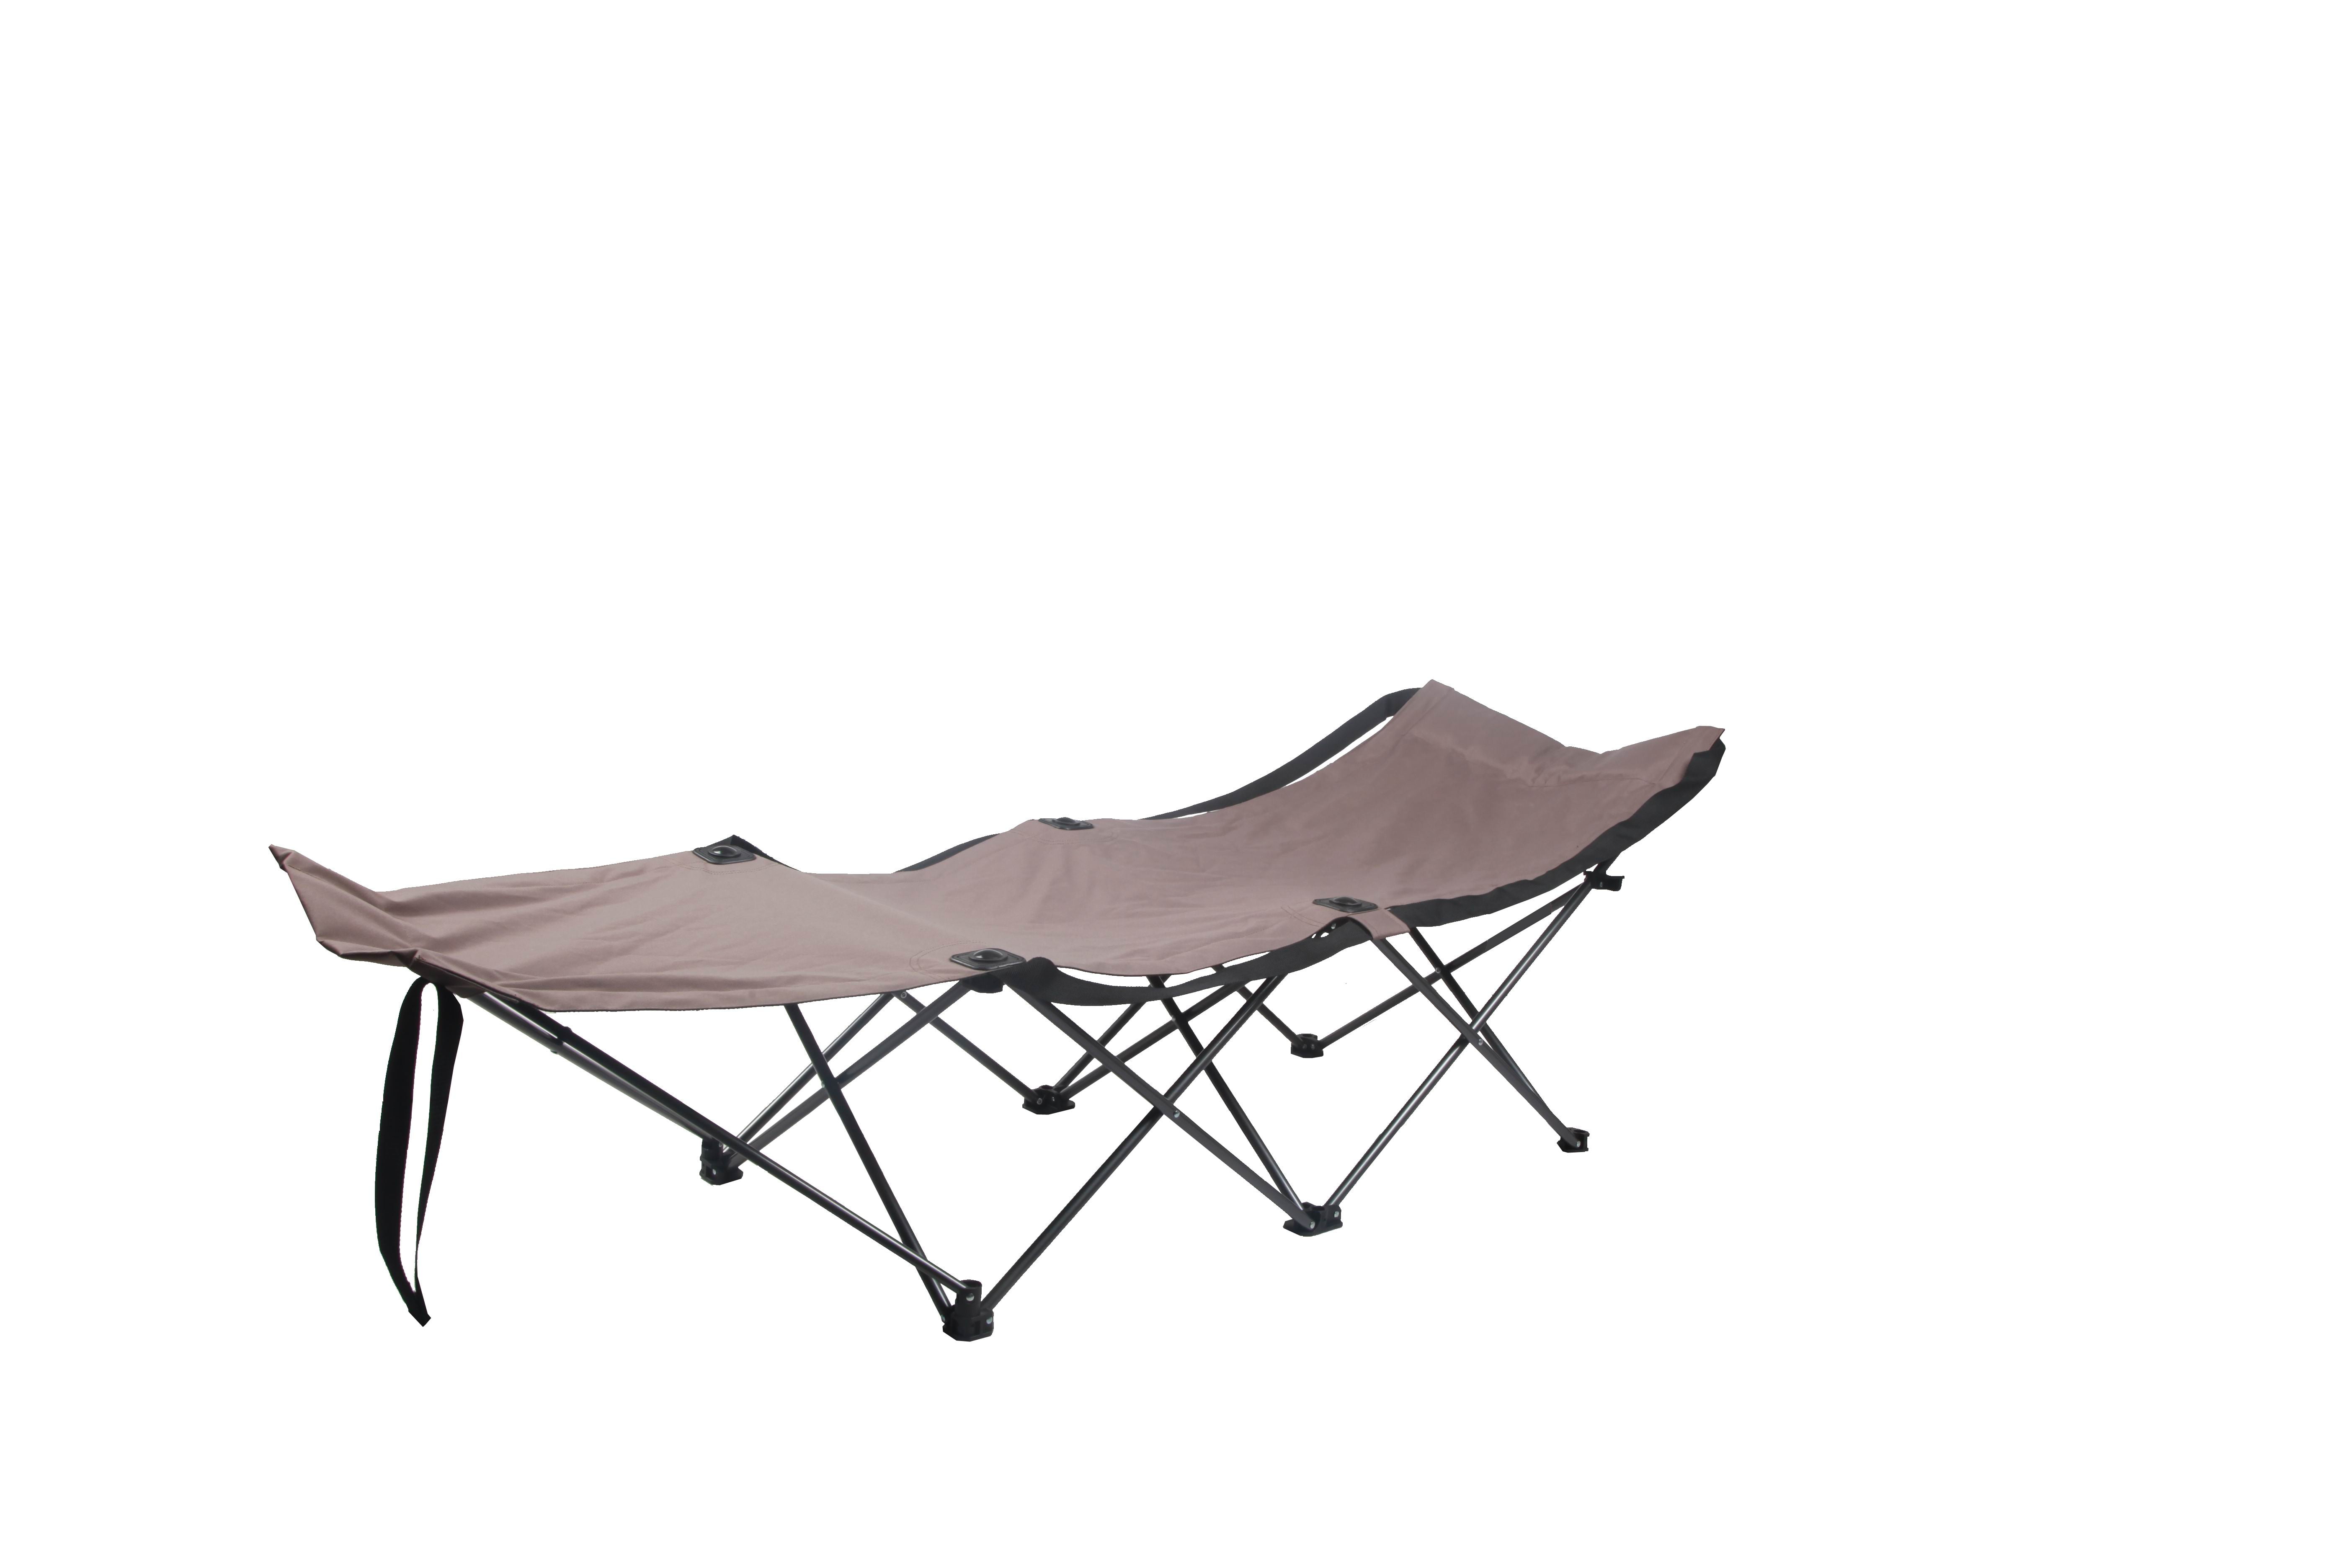 Ozark Trail Collapsible Camp Cot, Beige 